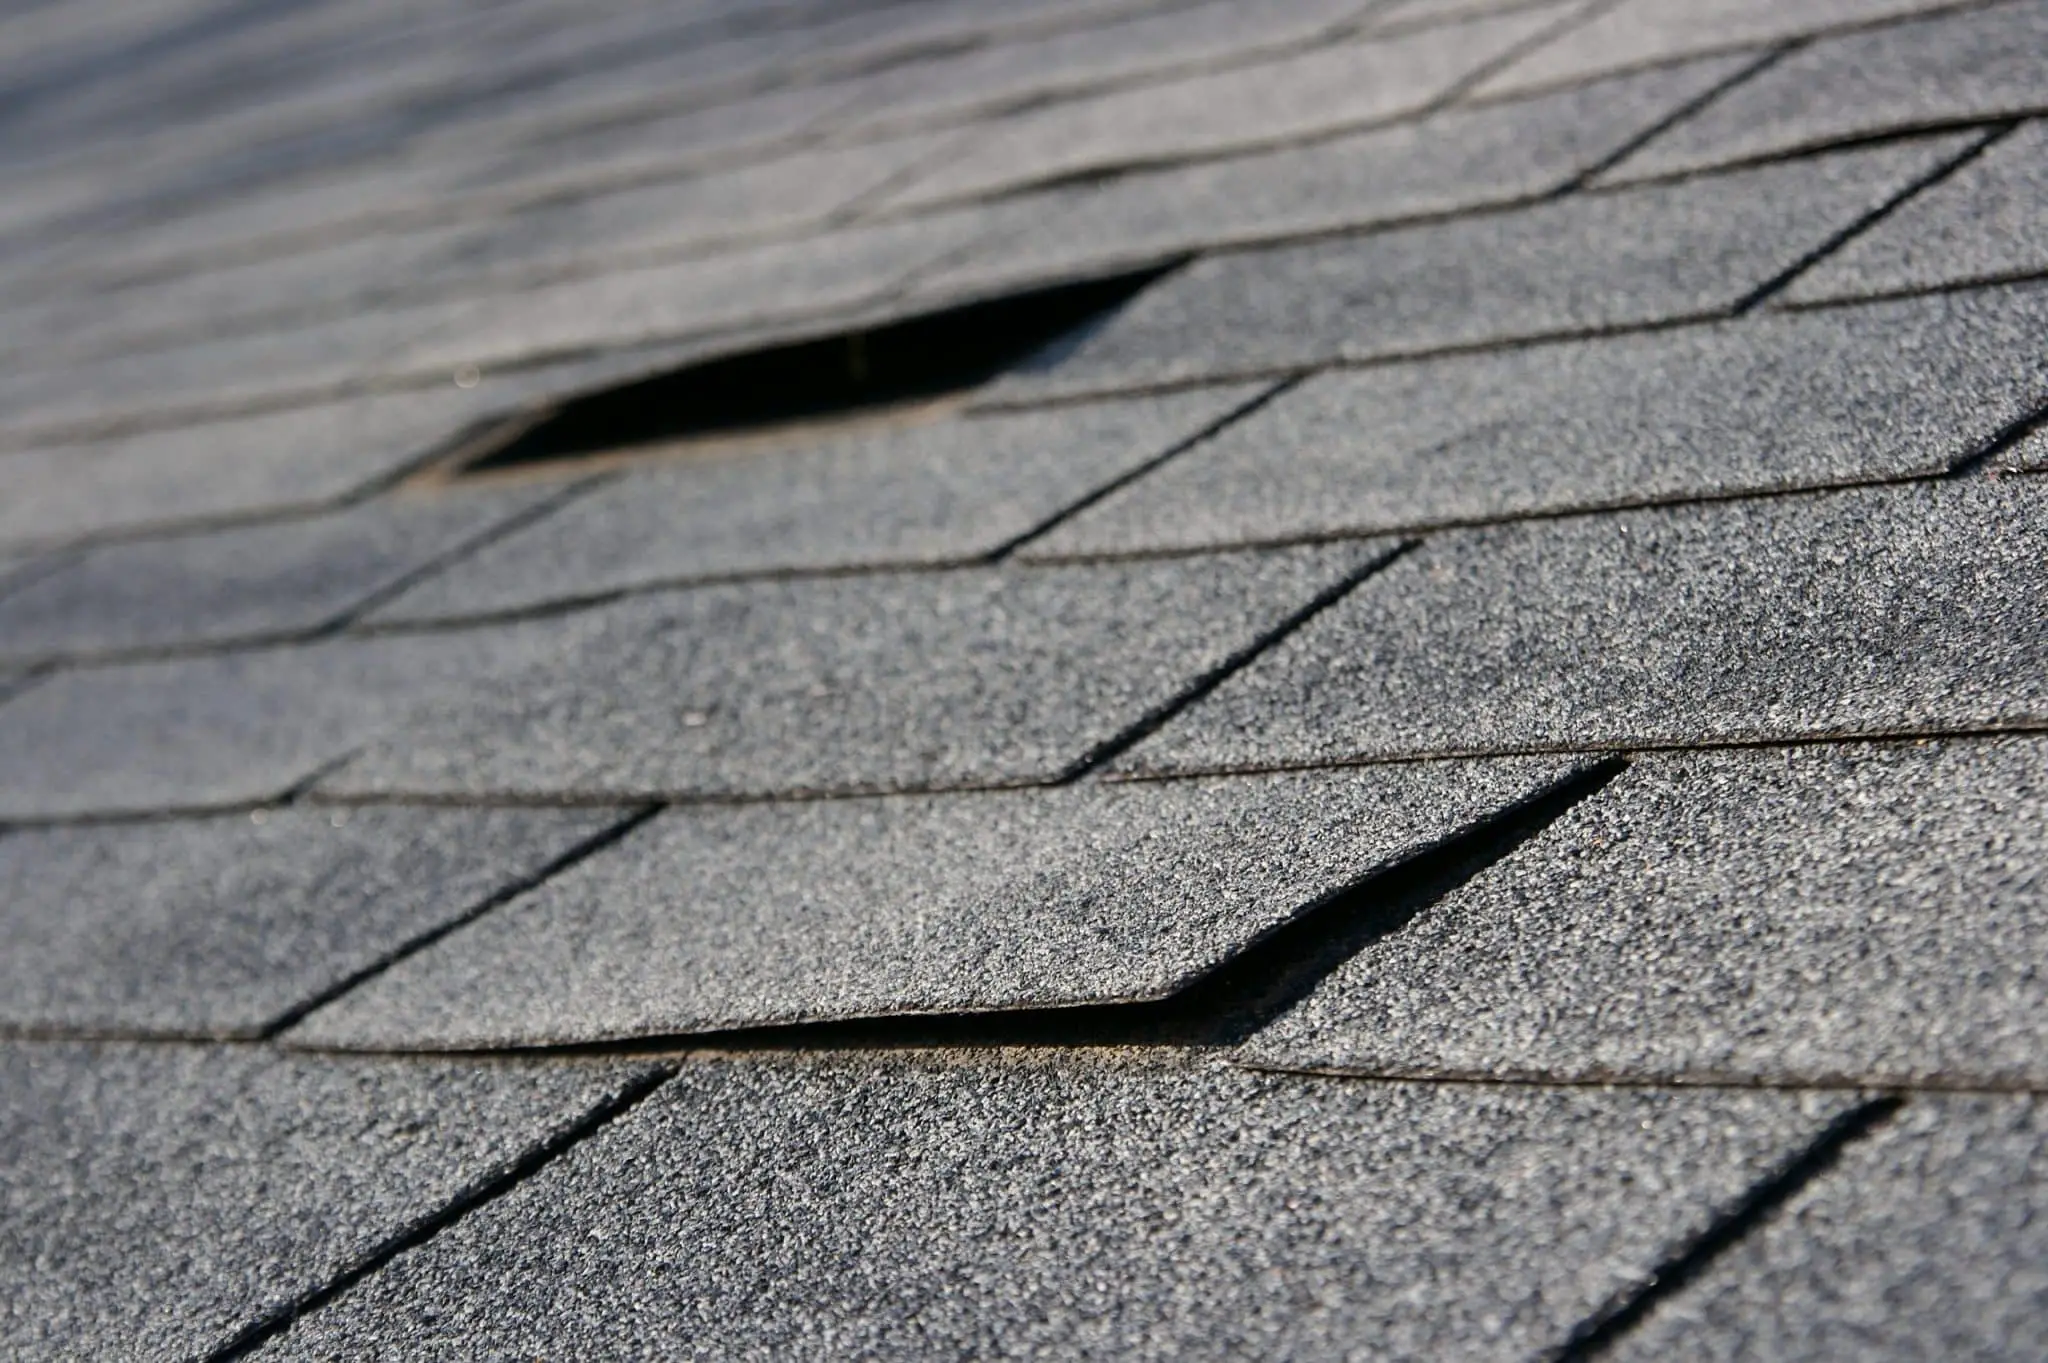 How to Look for Hail Damage on a Roof